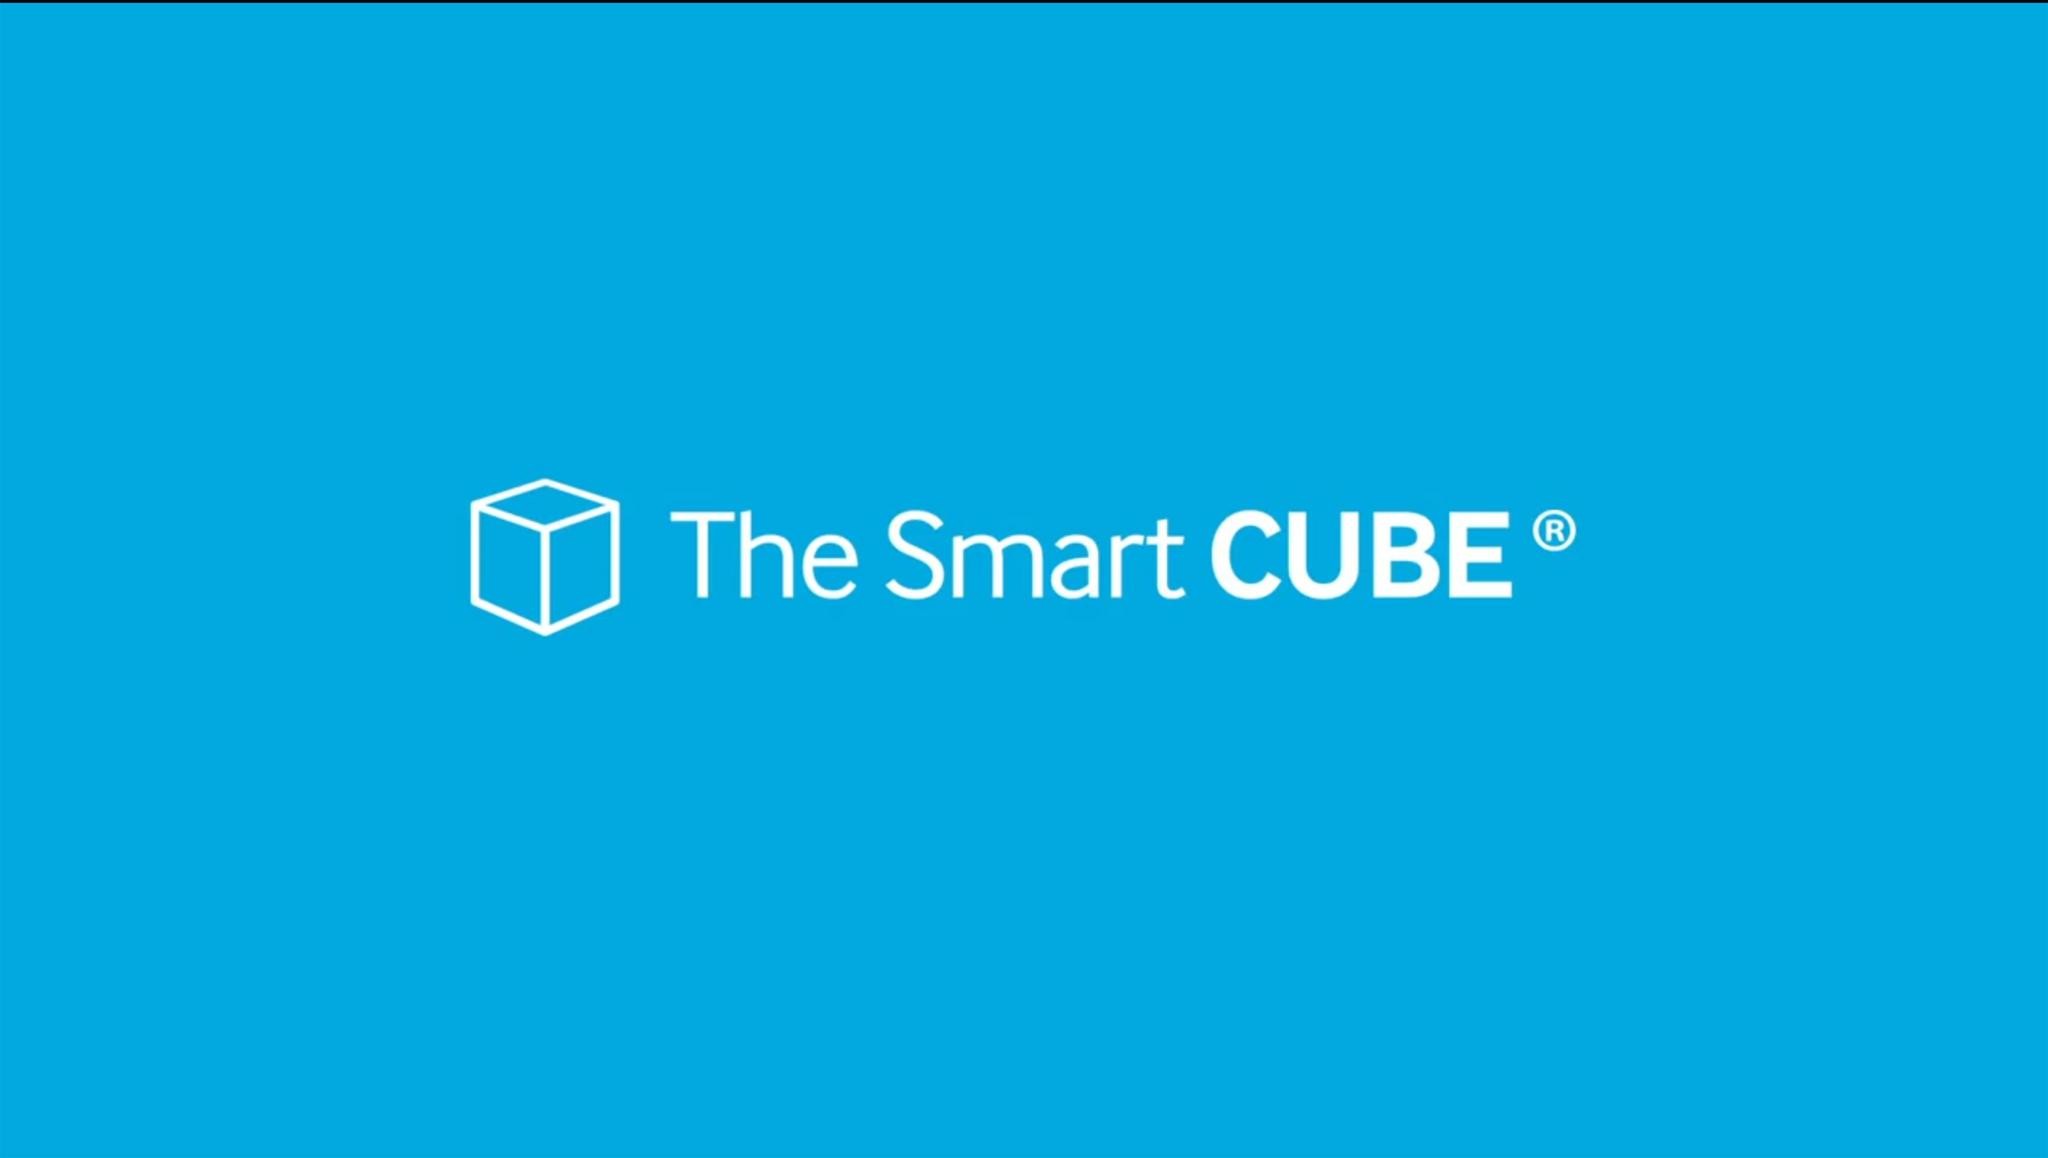 THE SMART CUBE